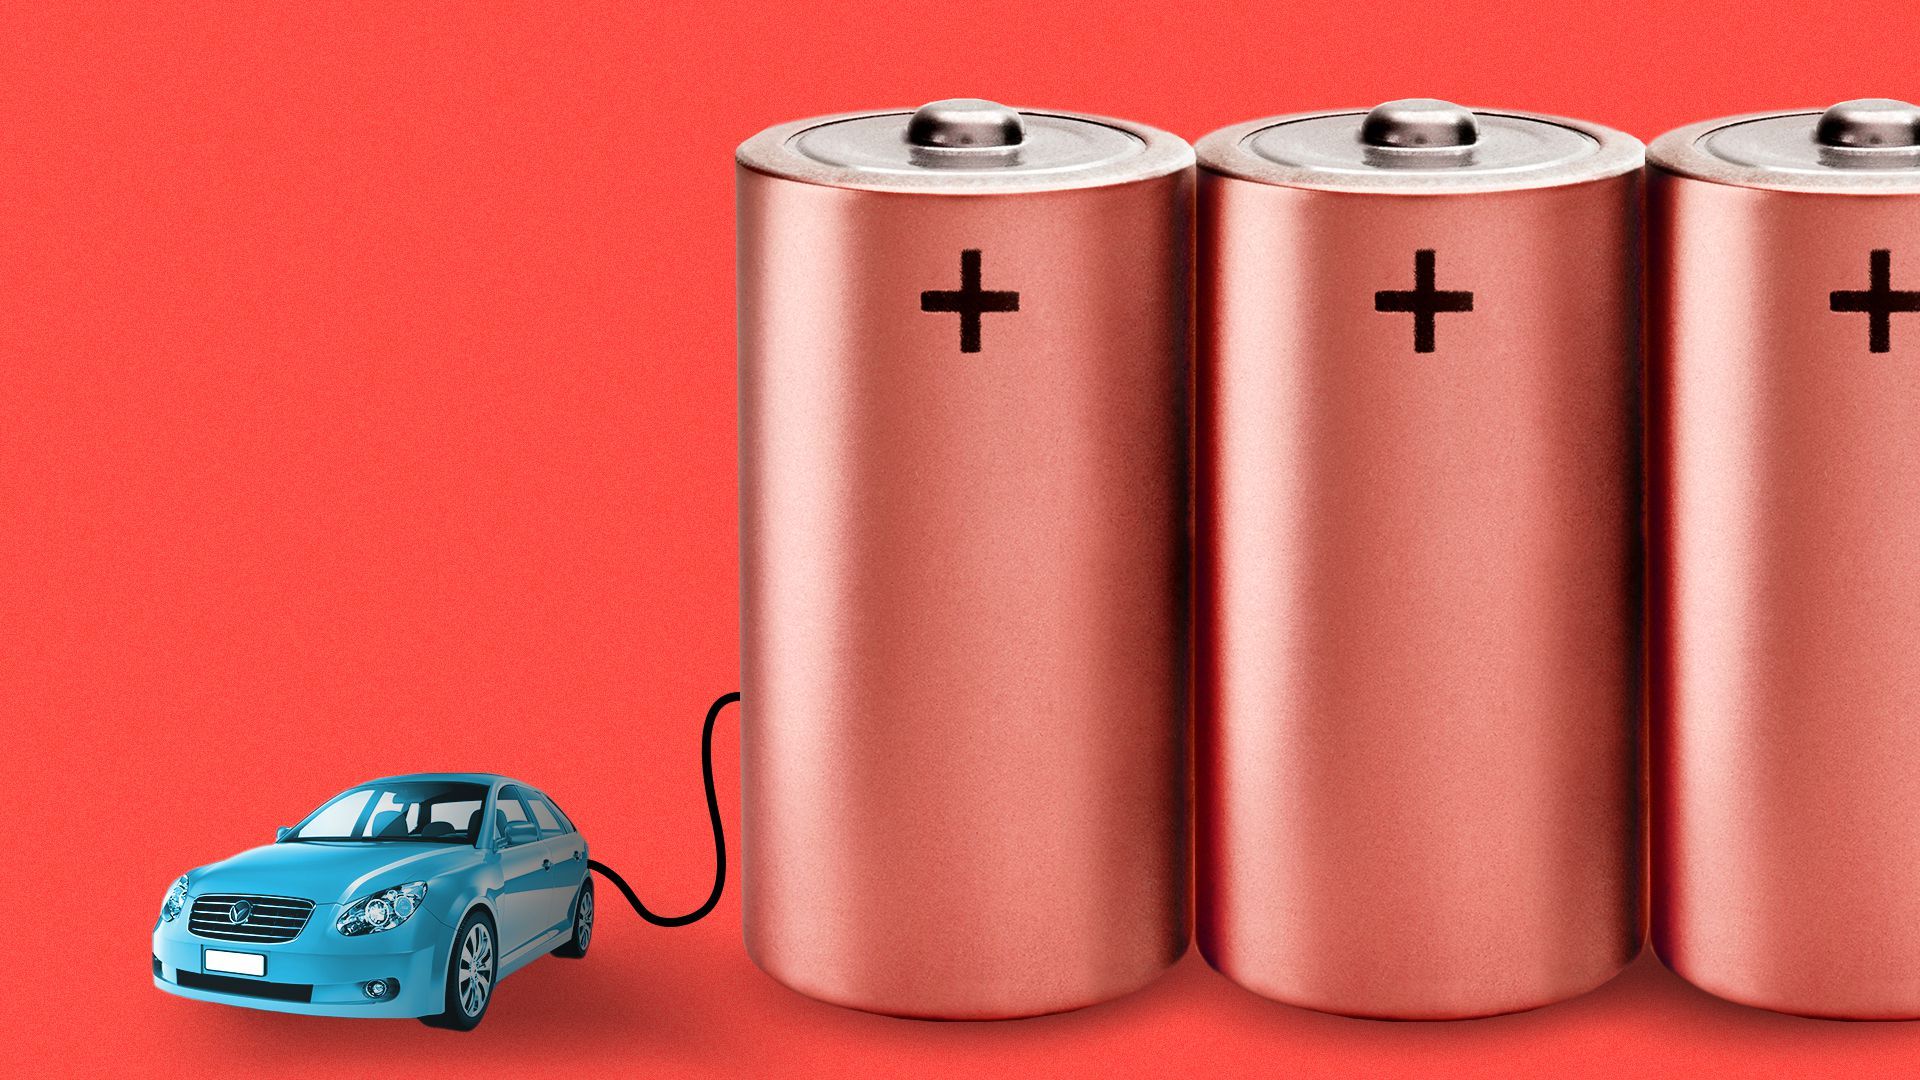 Illustration of a small car plugged into three large batteries